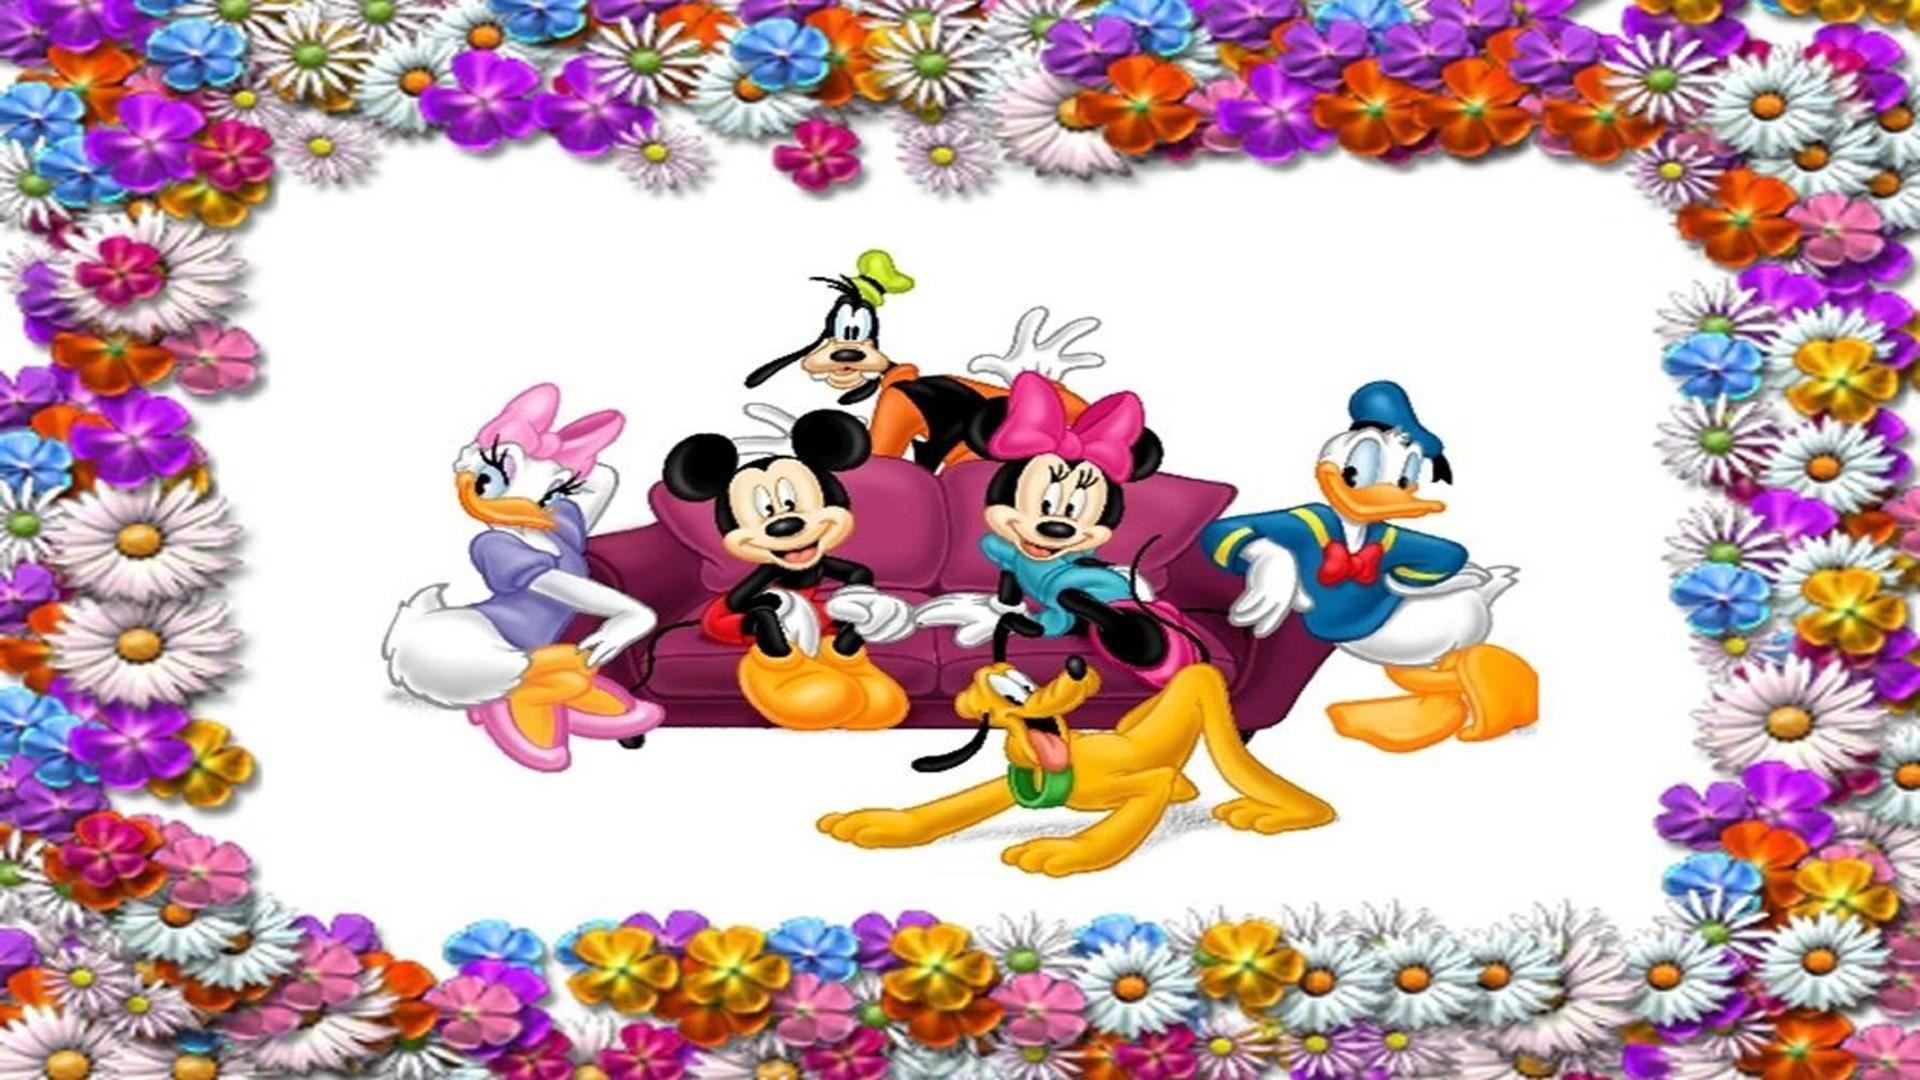 Mickey Mouse wallpapers 1920x1080 Full